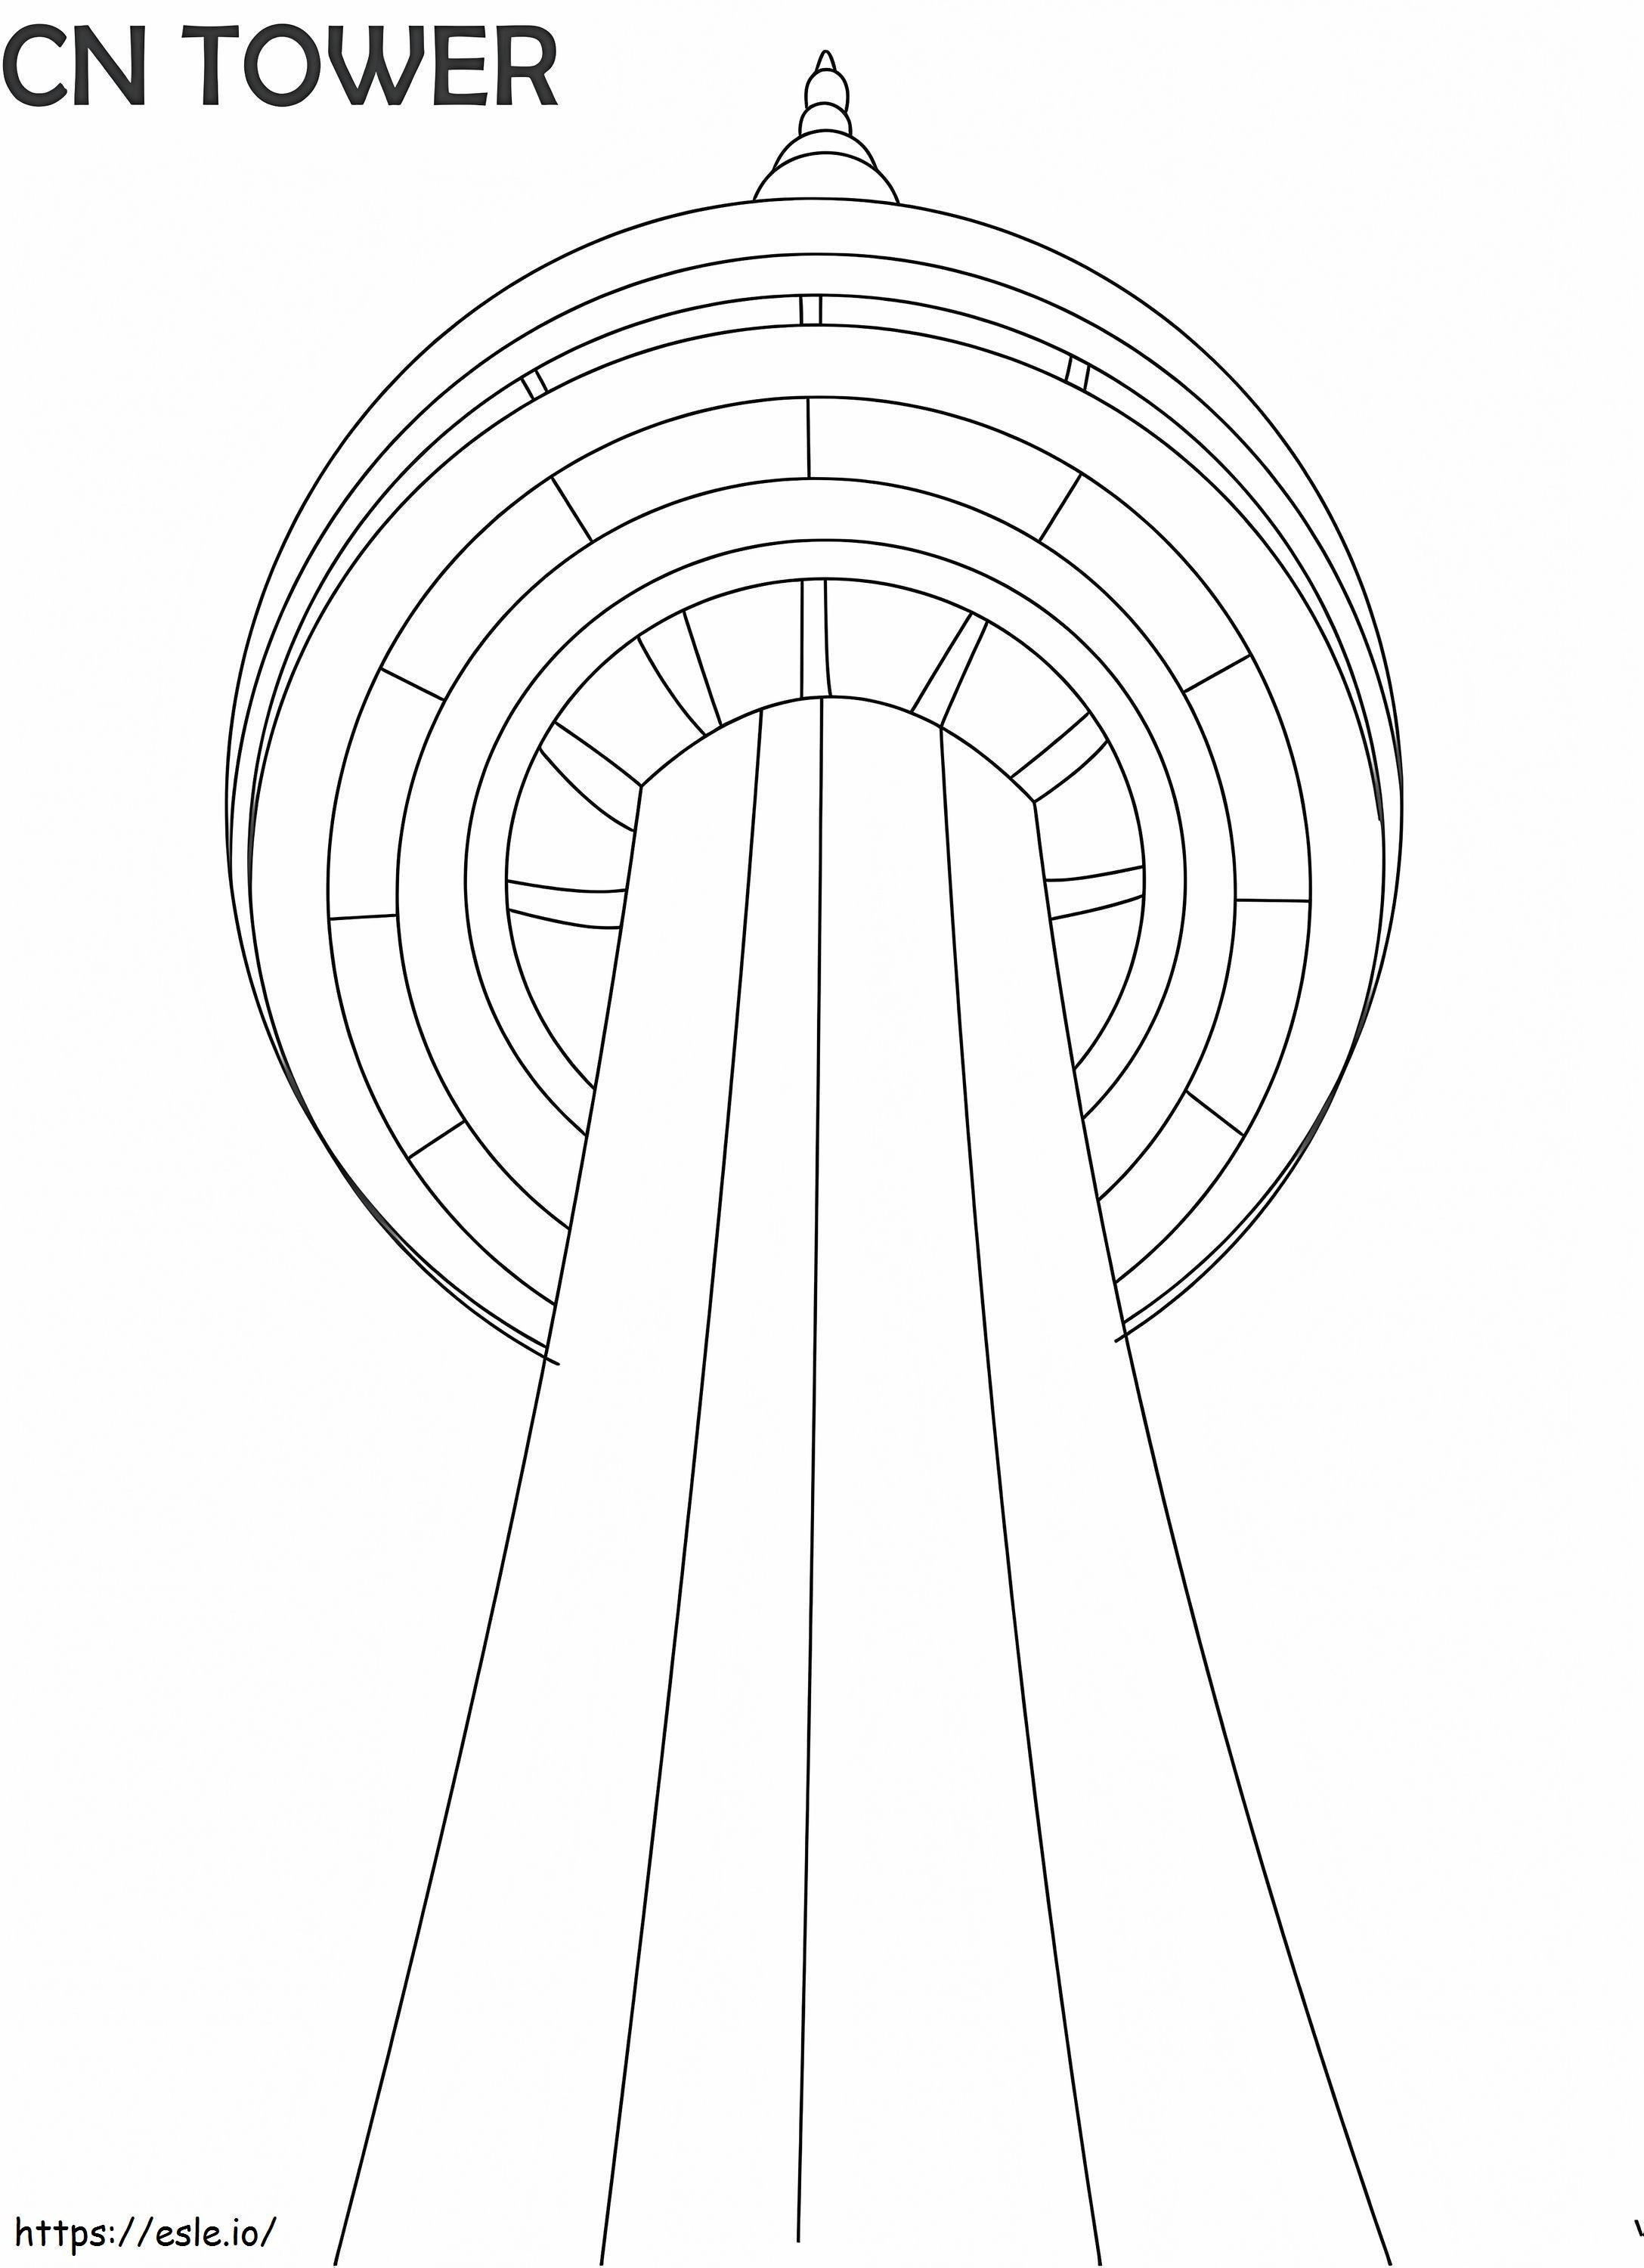 CN Tower 1 coloring page